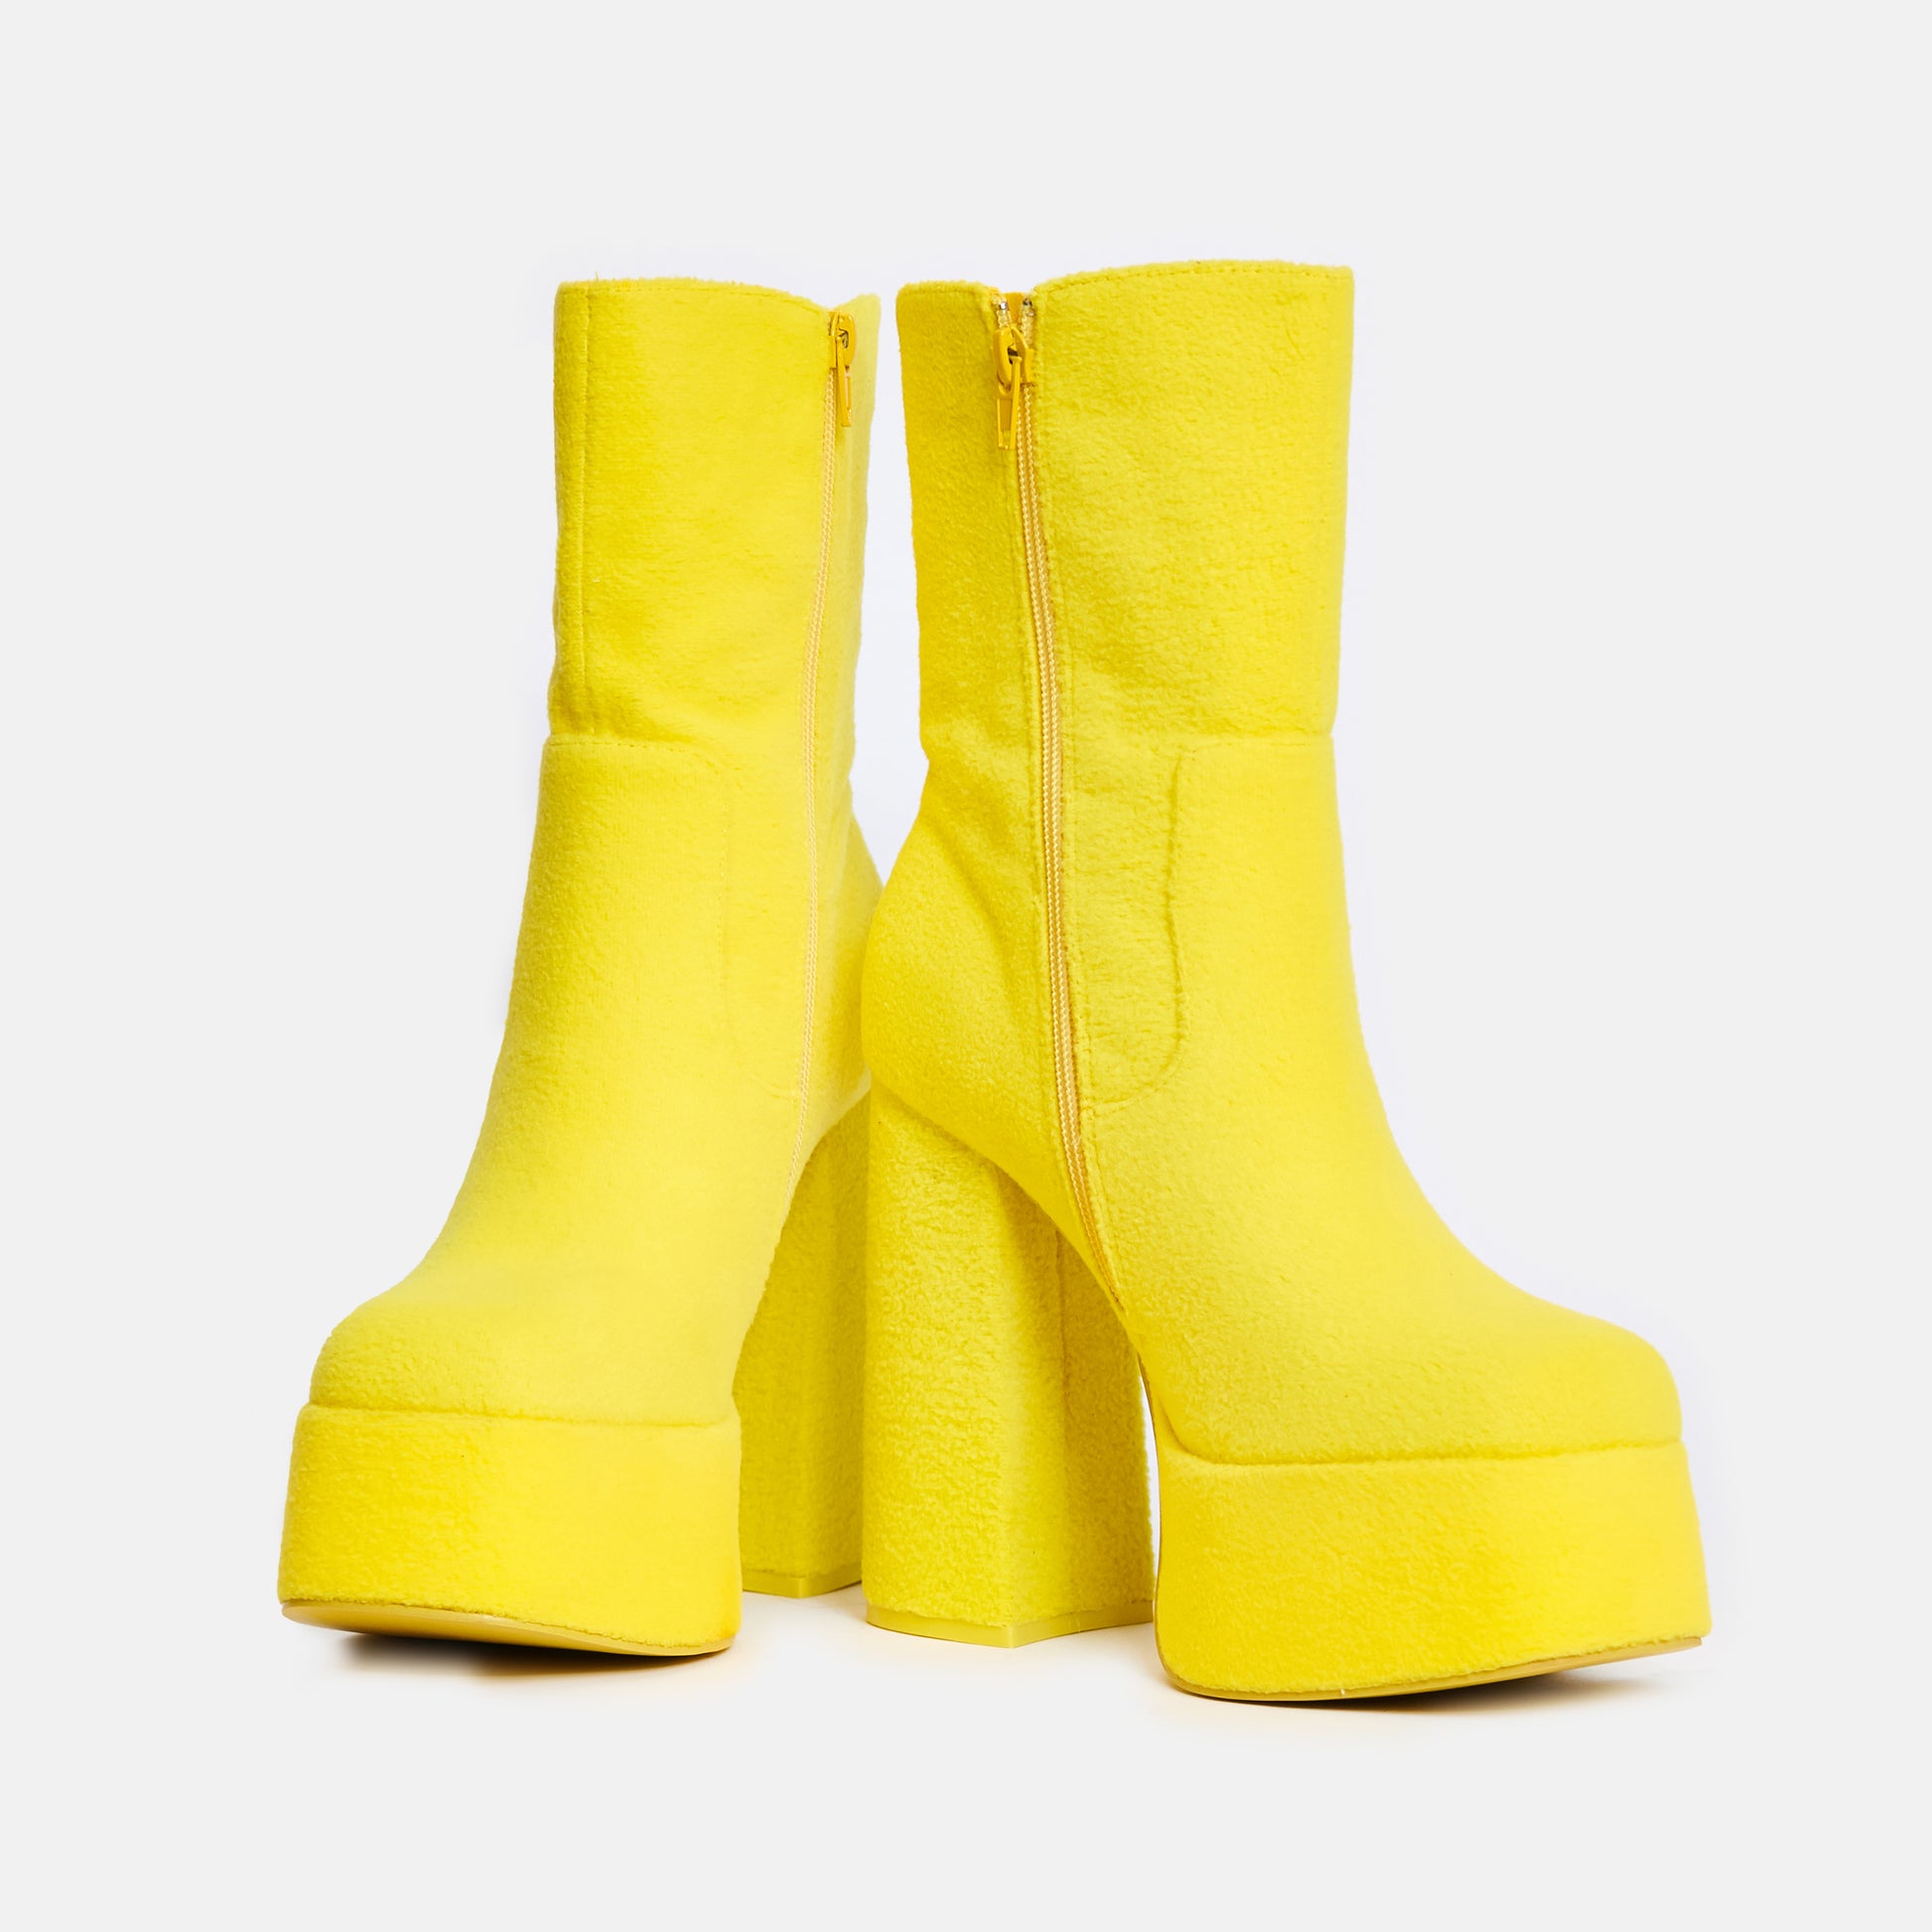 Laa Laa Fluffy Platform Boots - Ankle Boots - KOI Footwear - Yellow - Front View